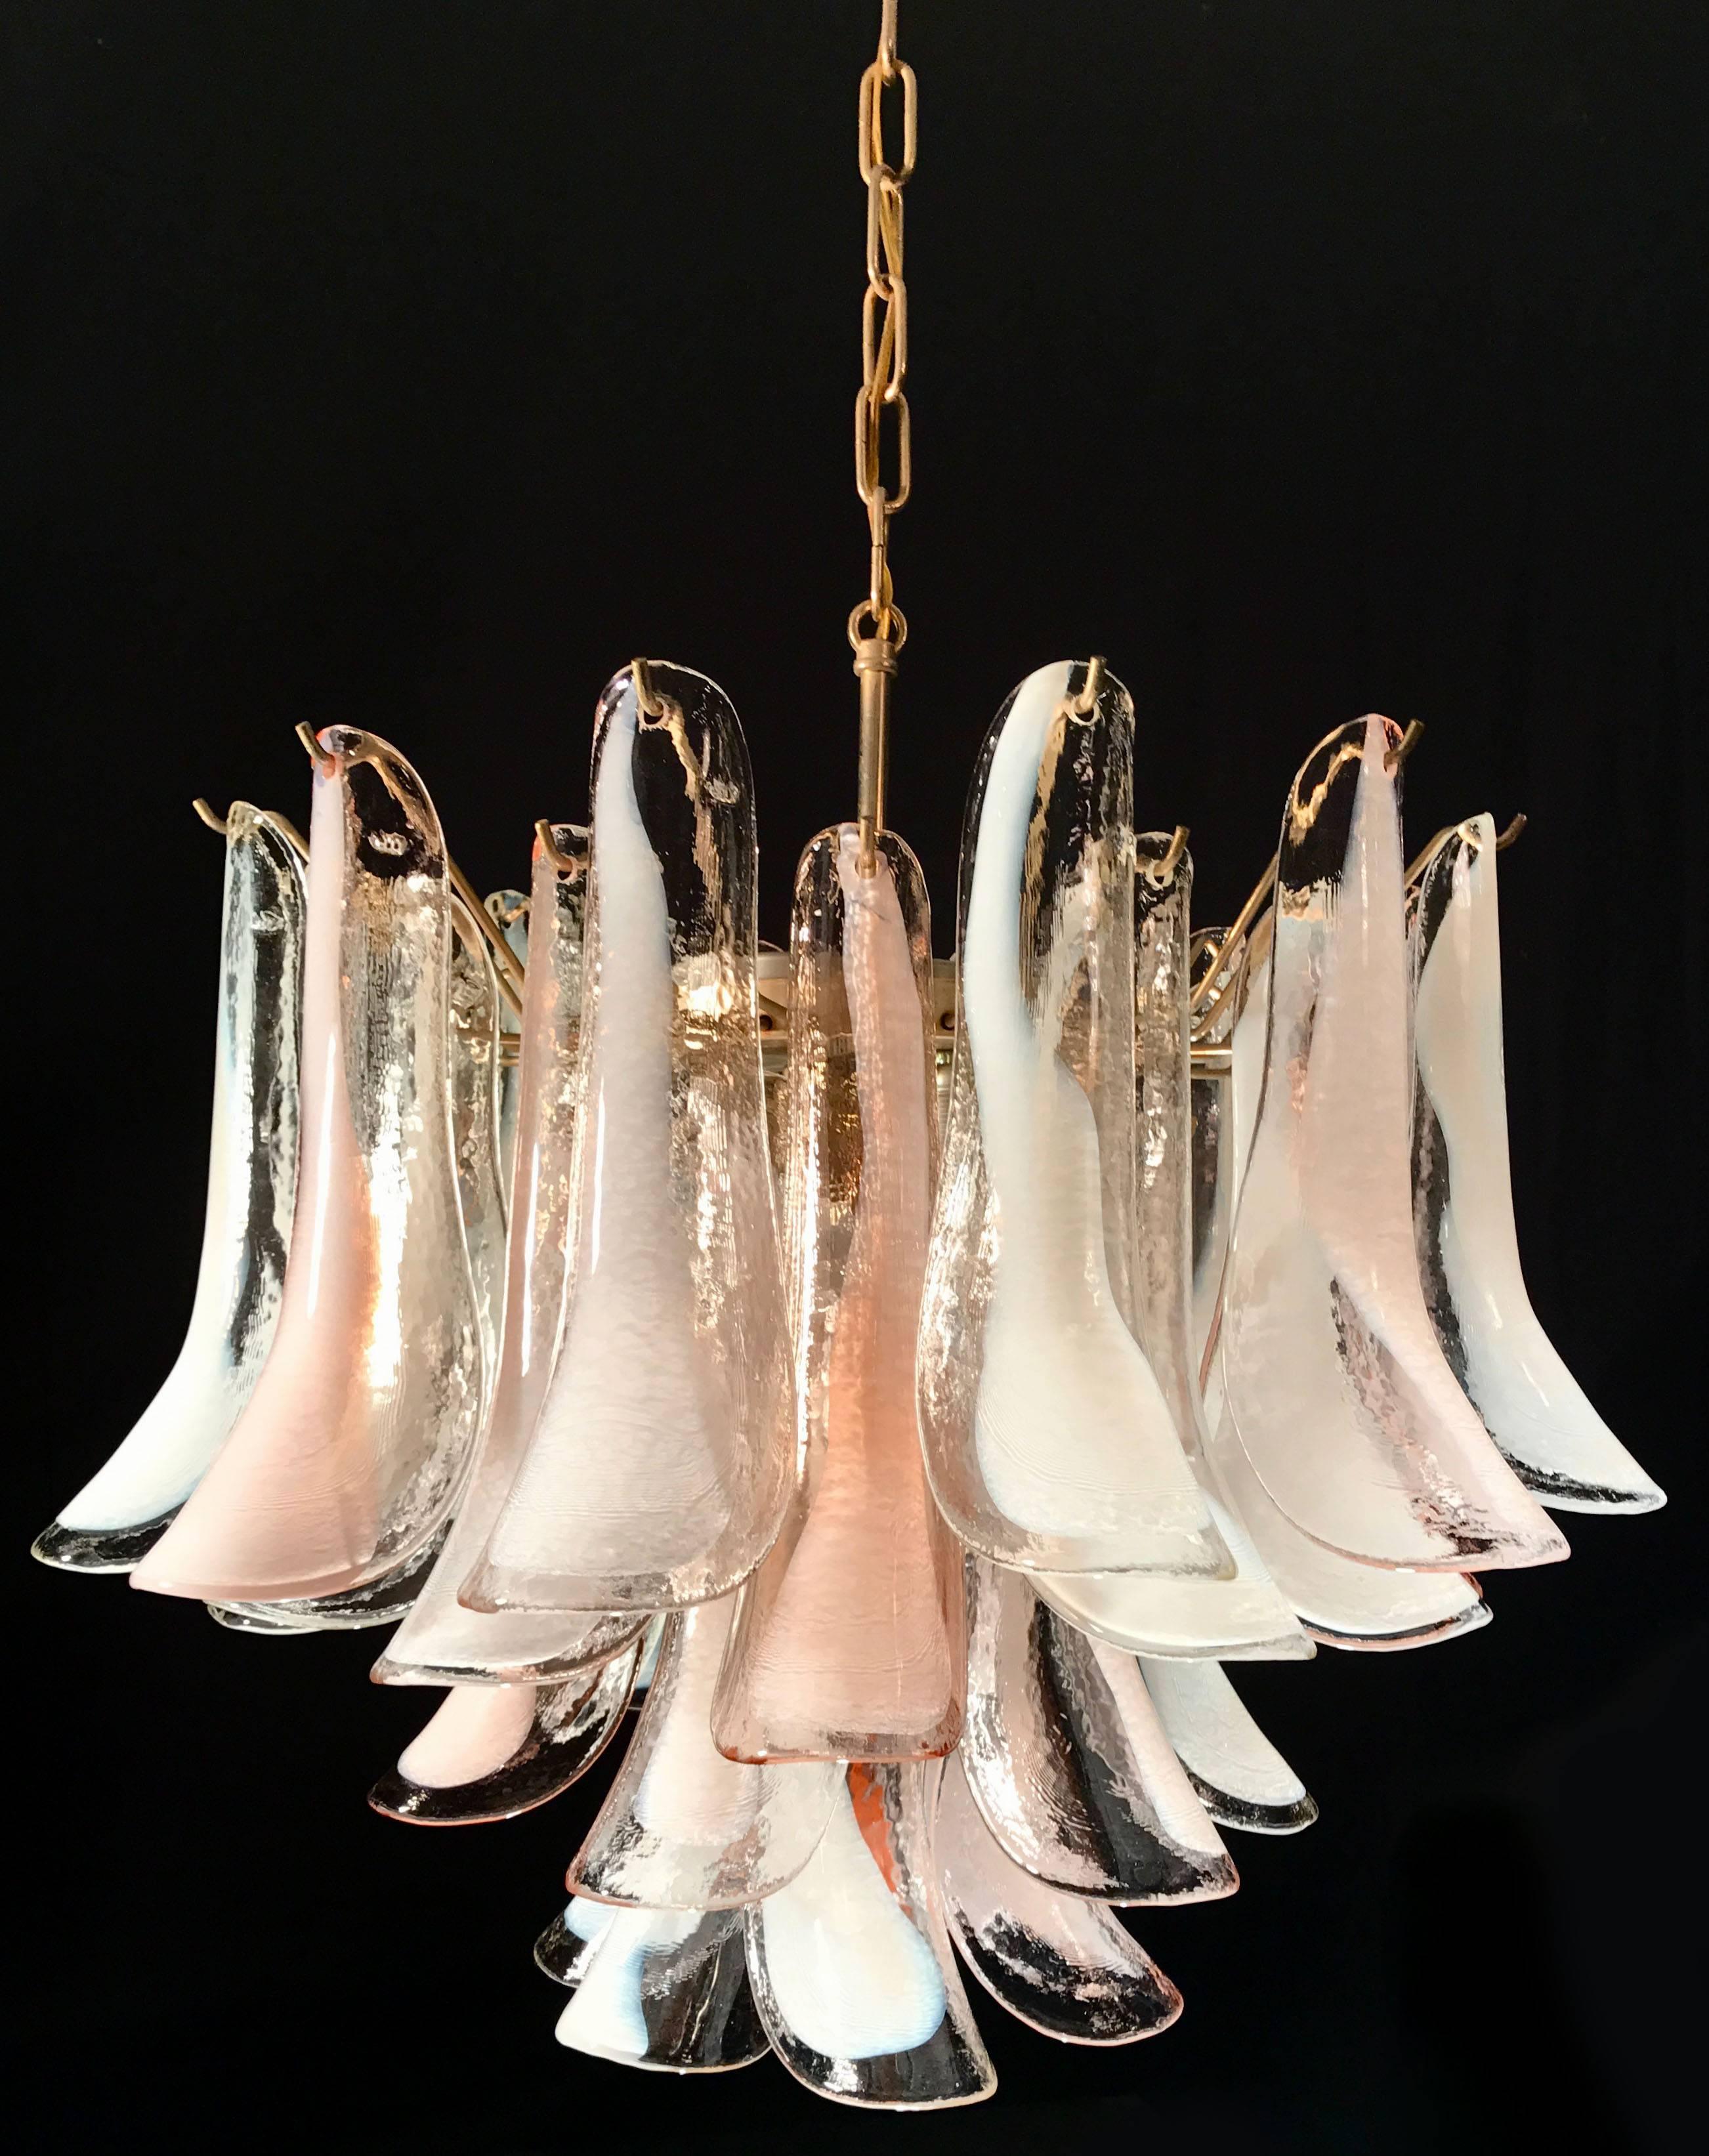 Pair of Beautiful Murano Petals Chandeliers by Mazzega, 1980s For Sale 2